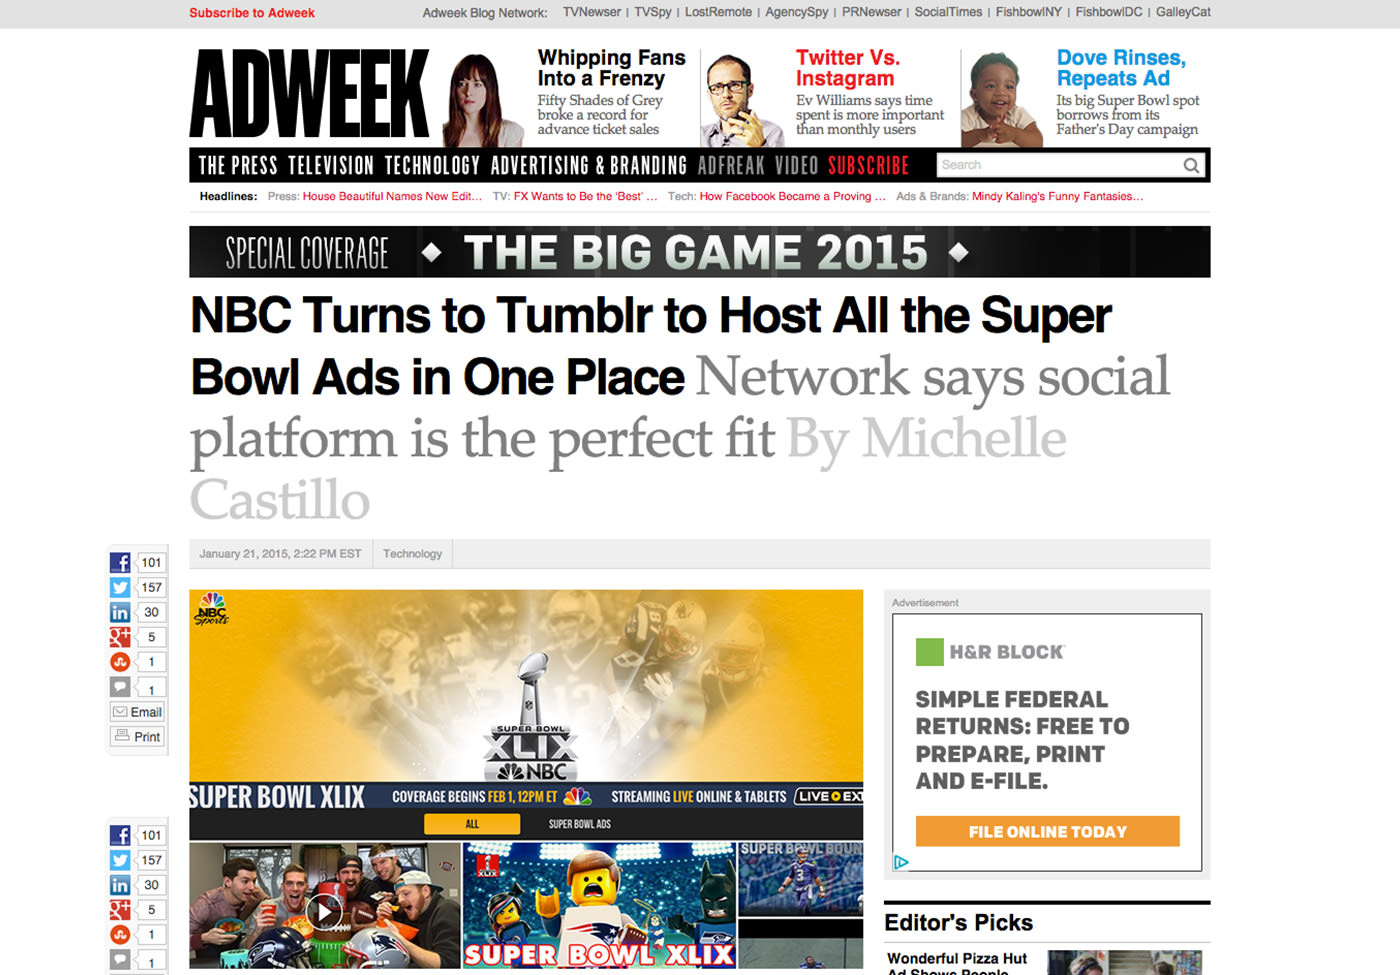 Adweek coverage of the NBC Sports Super Bowl site: "NBC Turns to Tumblr to Host All the Super Bowl Ads in one Place"